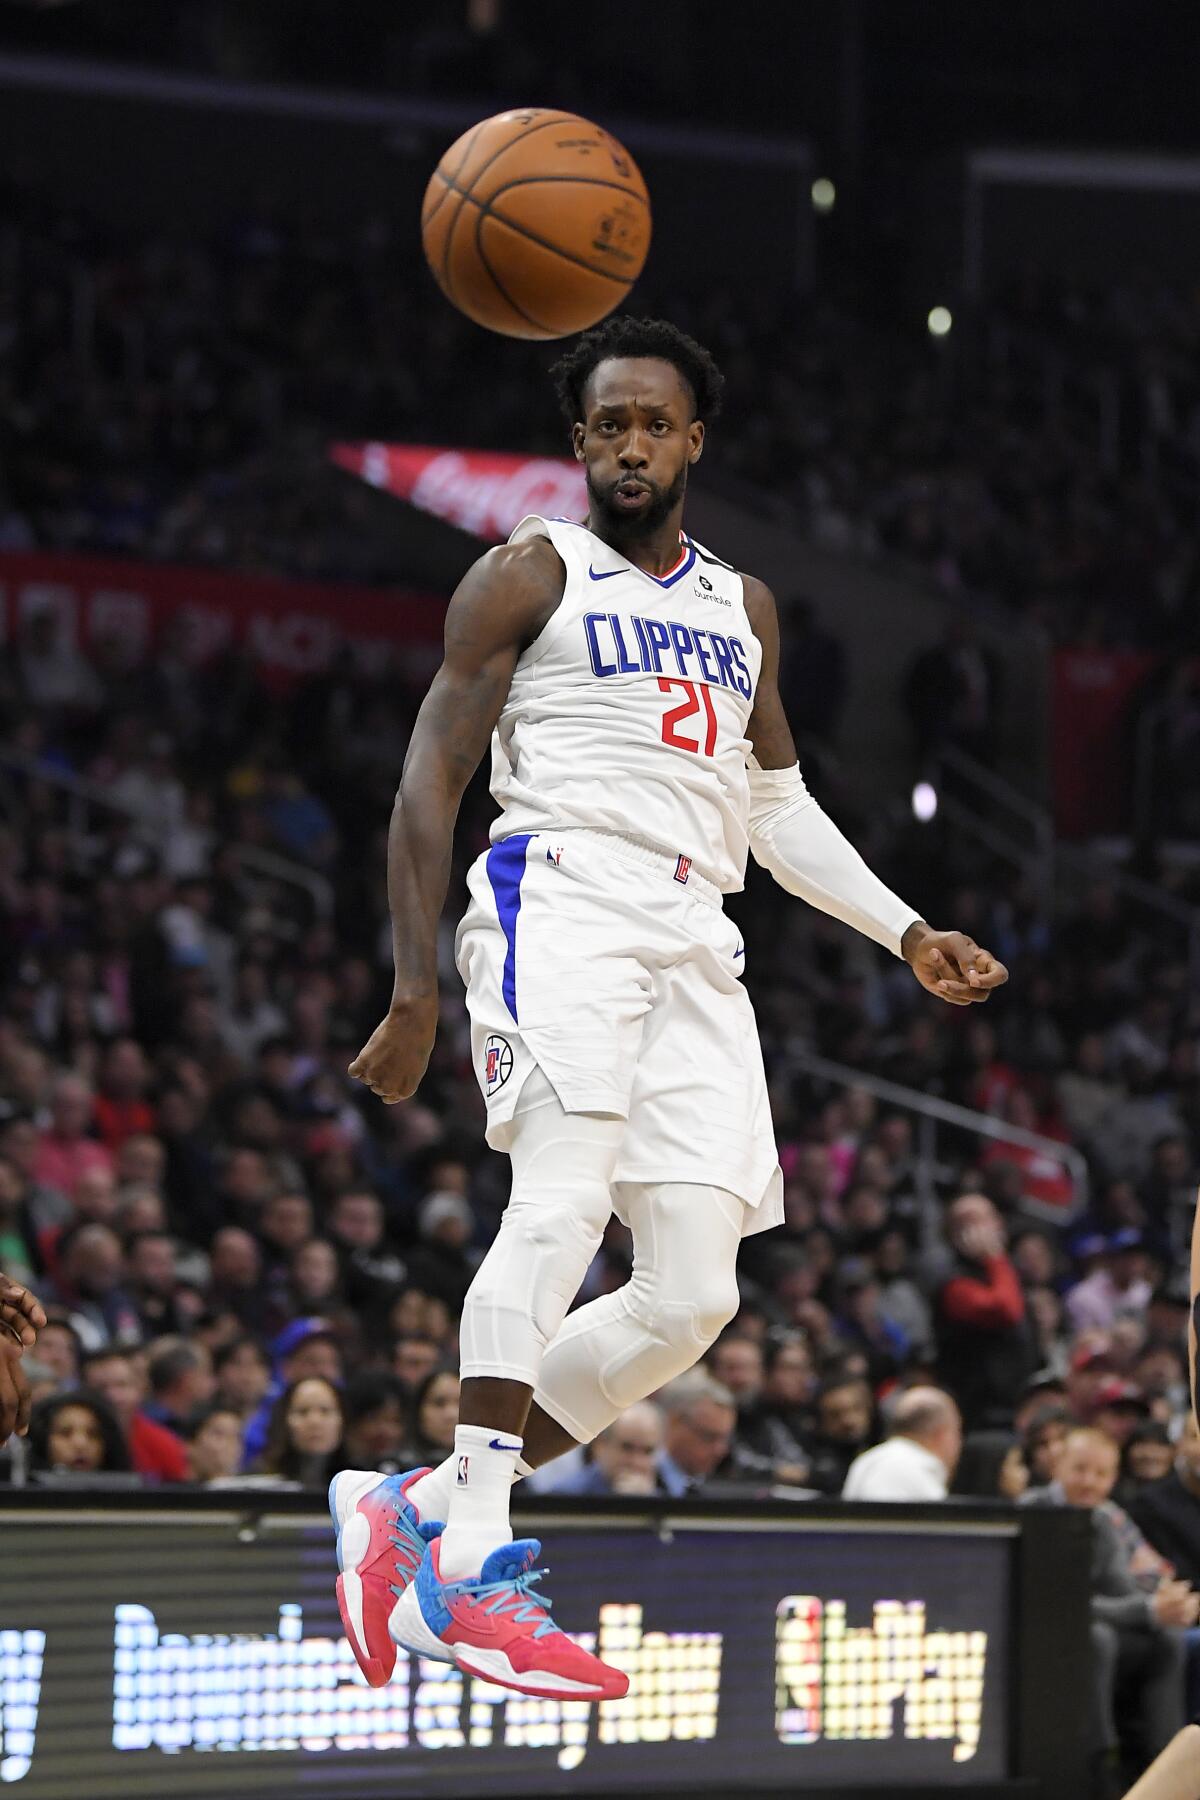 Clippers guard Patrick Beverley passes the ball during the first quarter against the Miami Heat on Feb. 5 at Staples Center. He was injured in the third quarter.